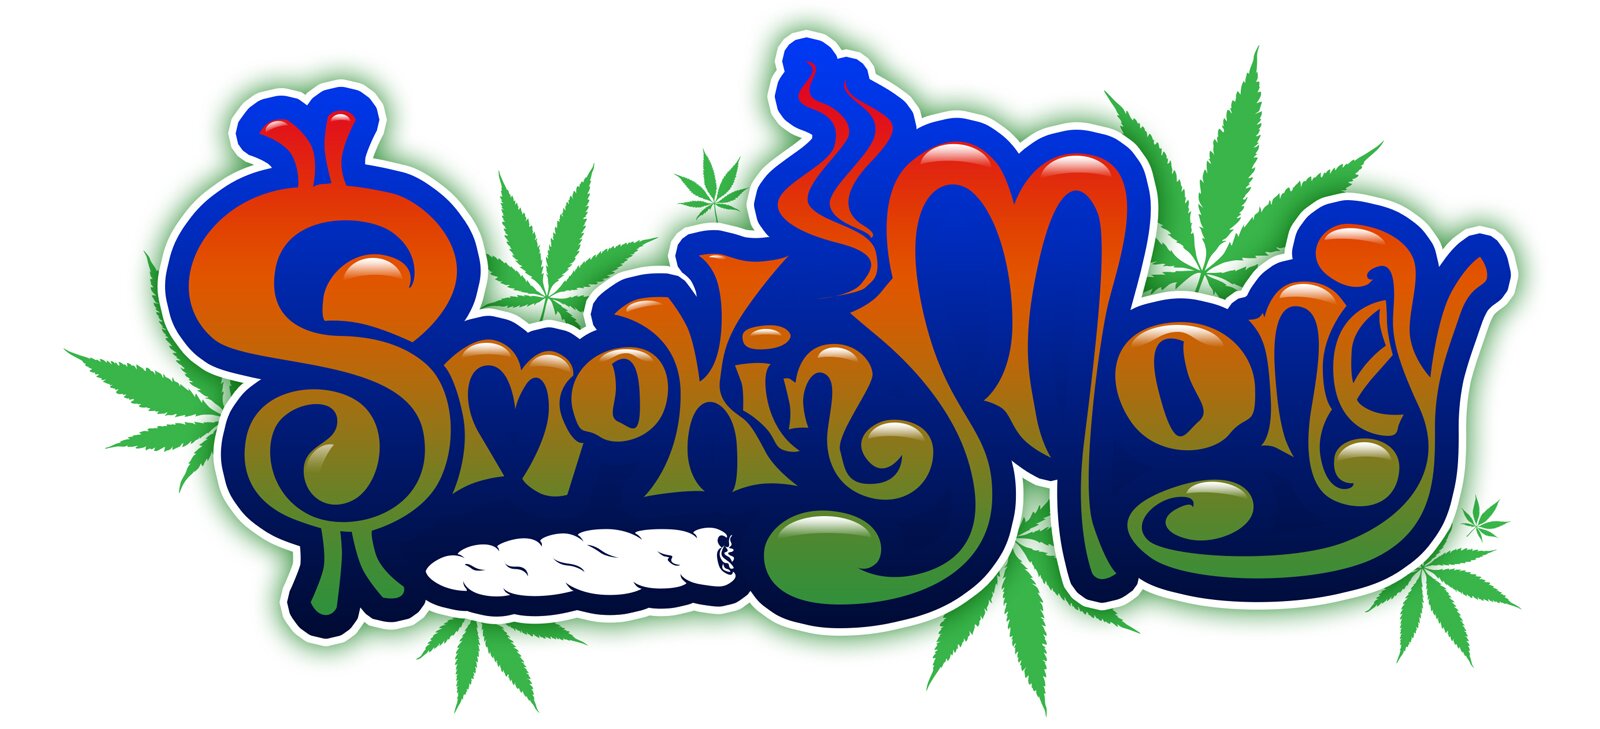 Smokin MoneyCard offers customers and businesses a safe, secure means to privately transact with participating clinics, dispensaries, merchants, and venues.